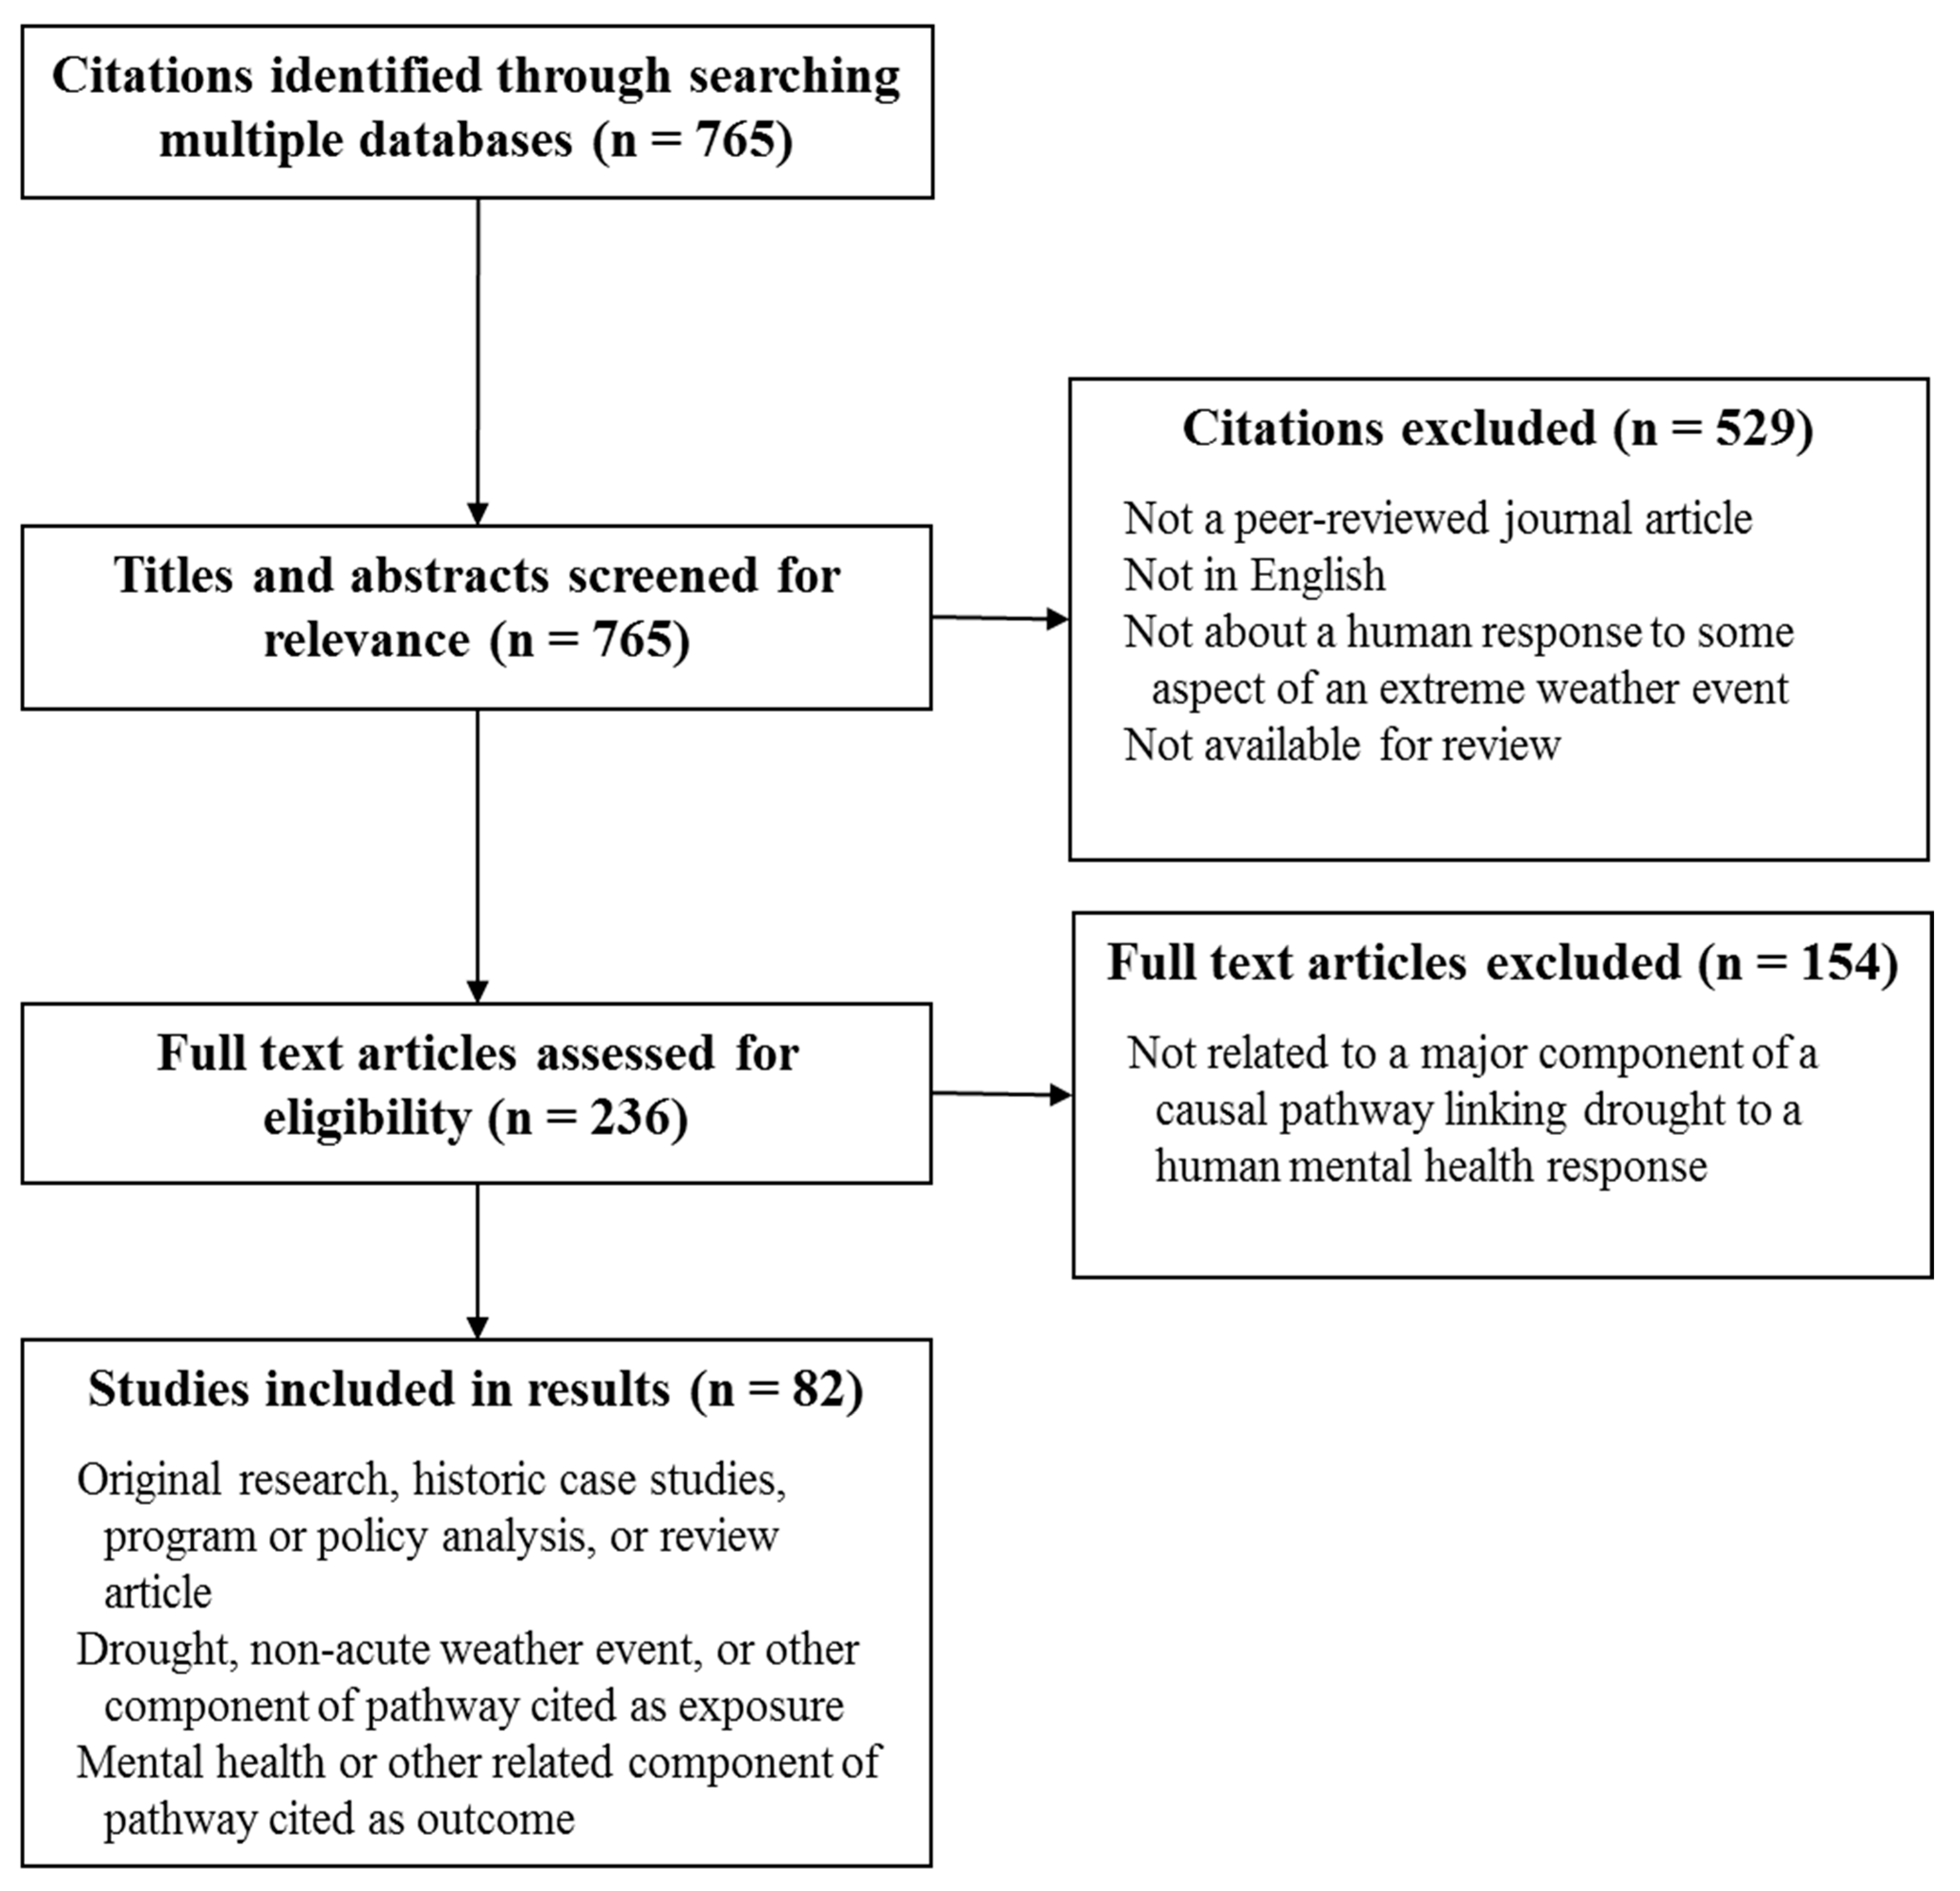 IJERPH | Free Full-Text | The Mental Health Outcomes of Drought: A  Systematic Review and Causal Process Diagram